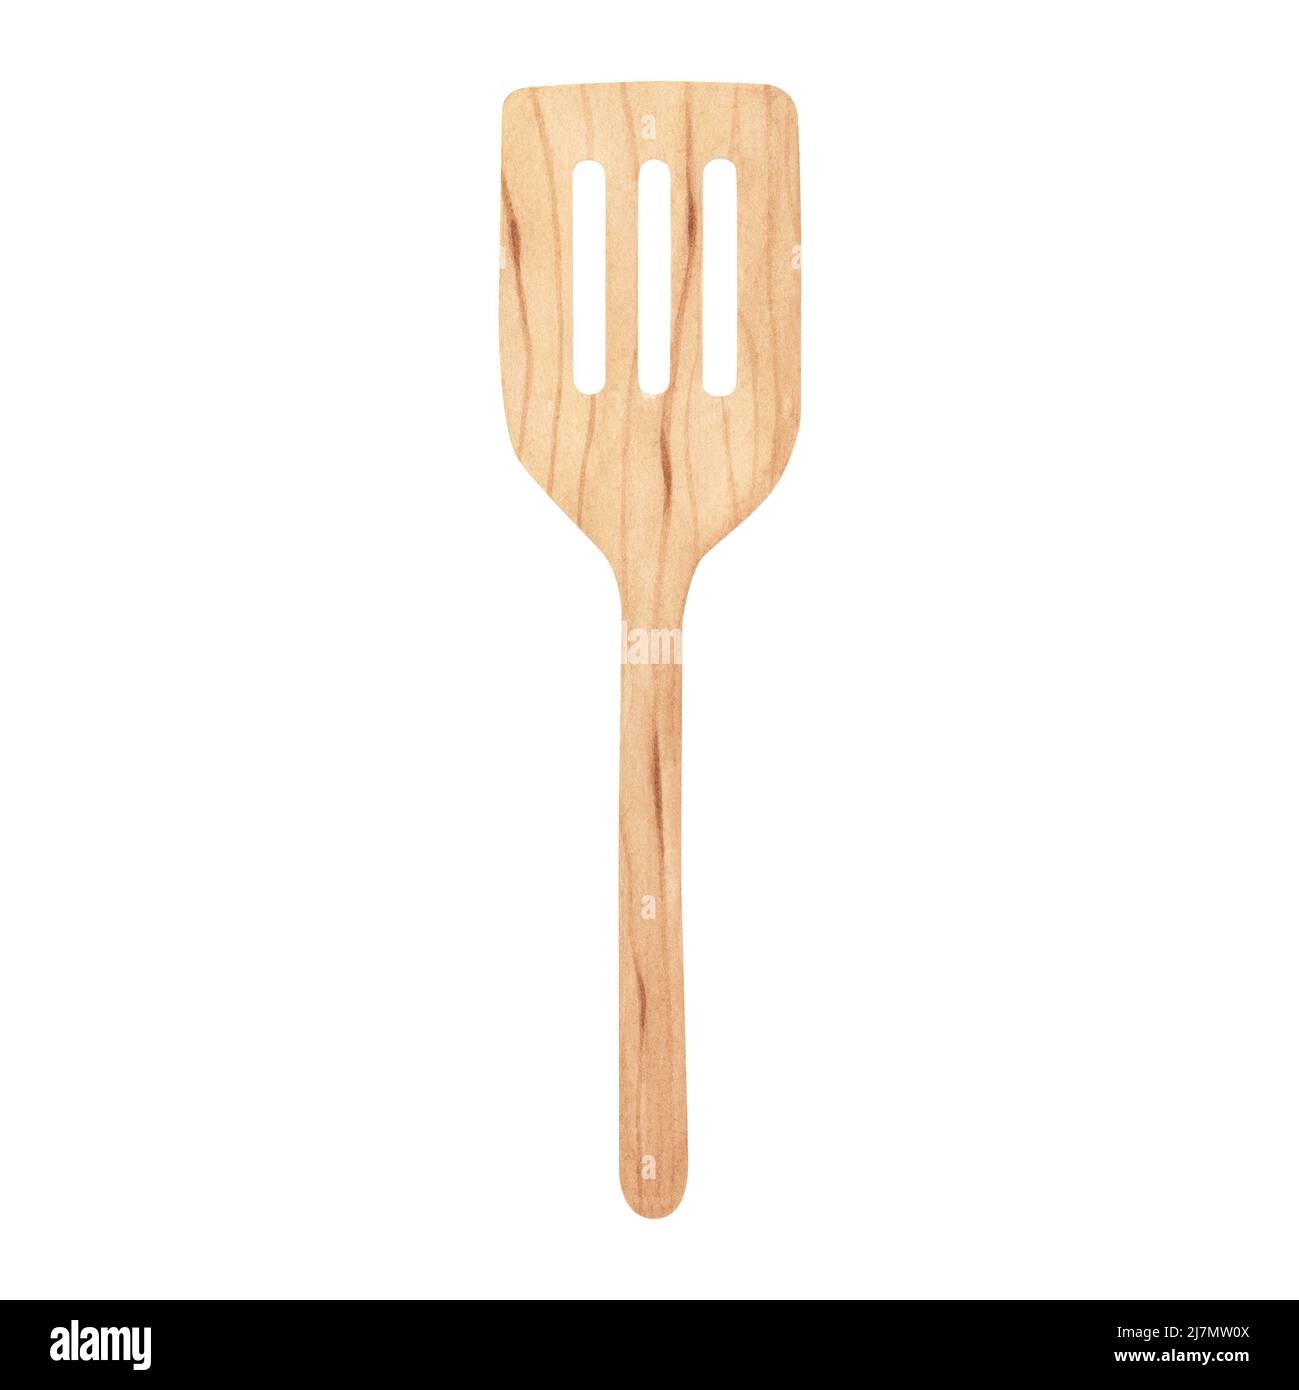 Wooden kitchen utensils: wood spatula. Watercolor illustration isolated on white background. Art for design, textiles, menu, poster Stock Photo